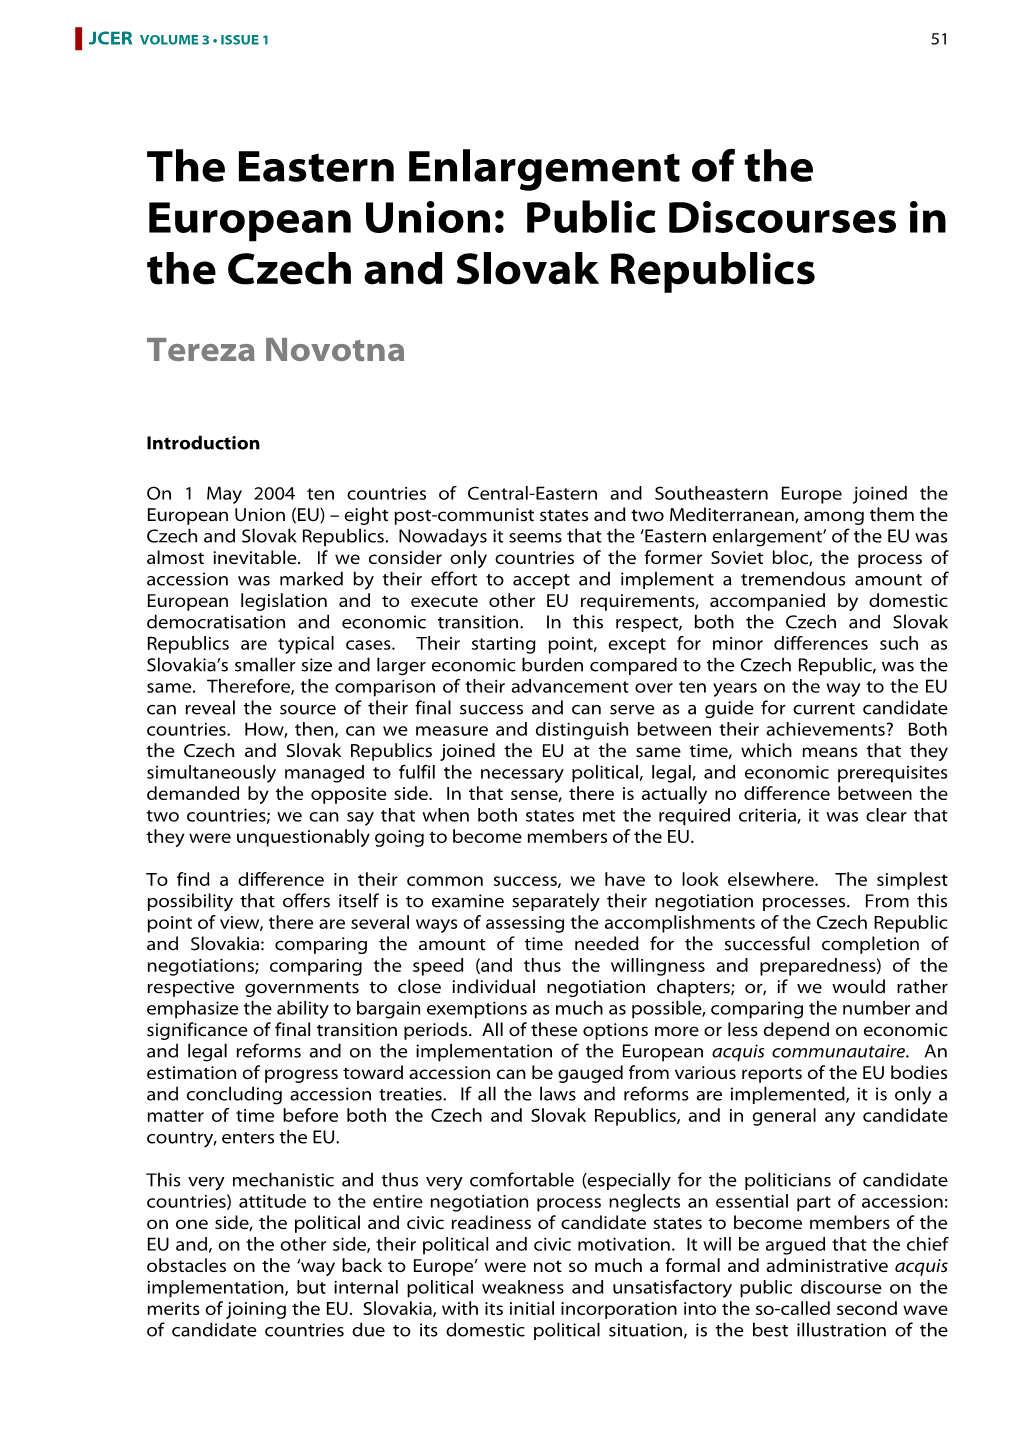 Public Discourses in the Czech and Slovak Republics